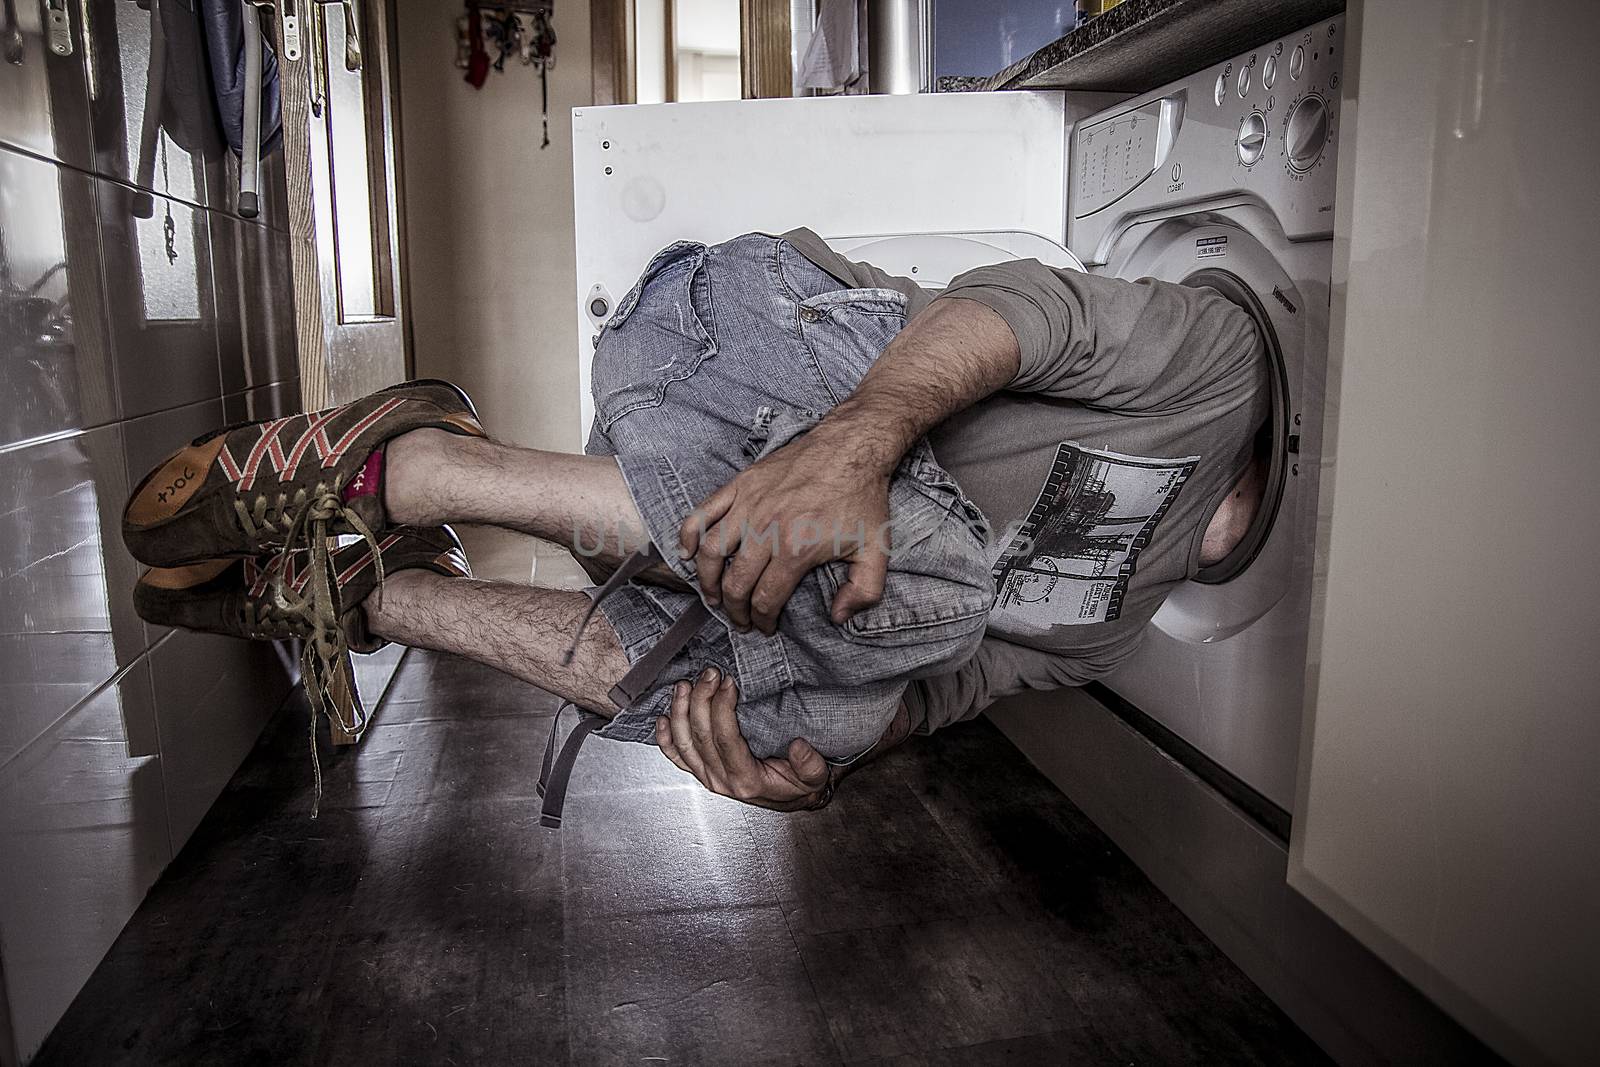 man flying with his head stuck in a washing machine